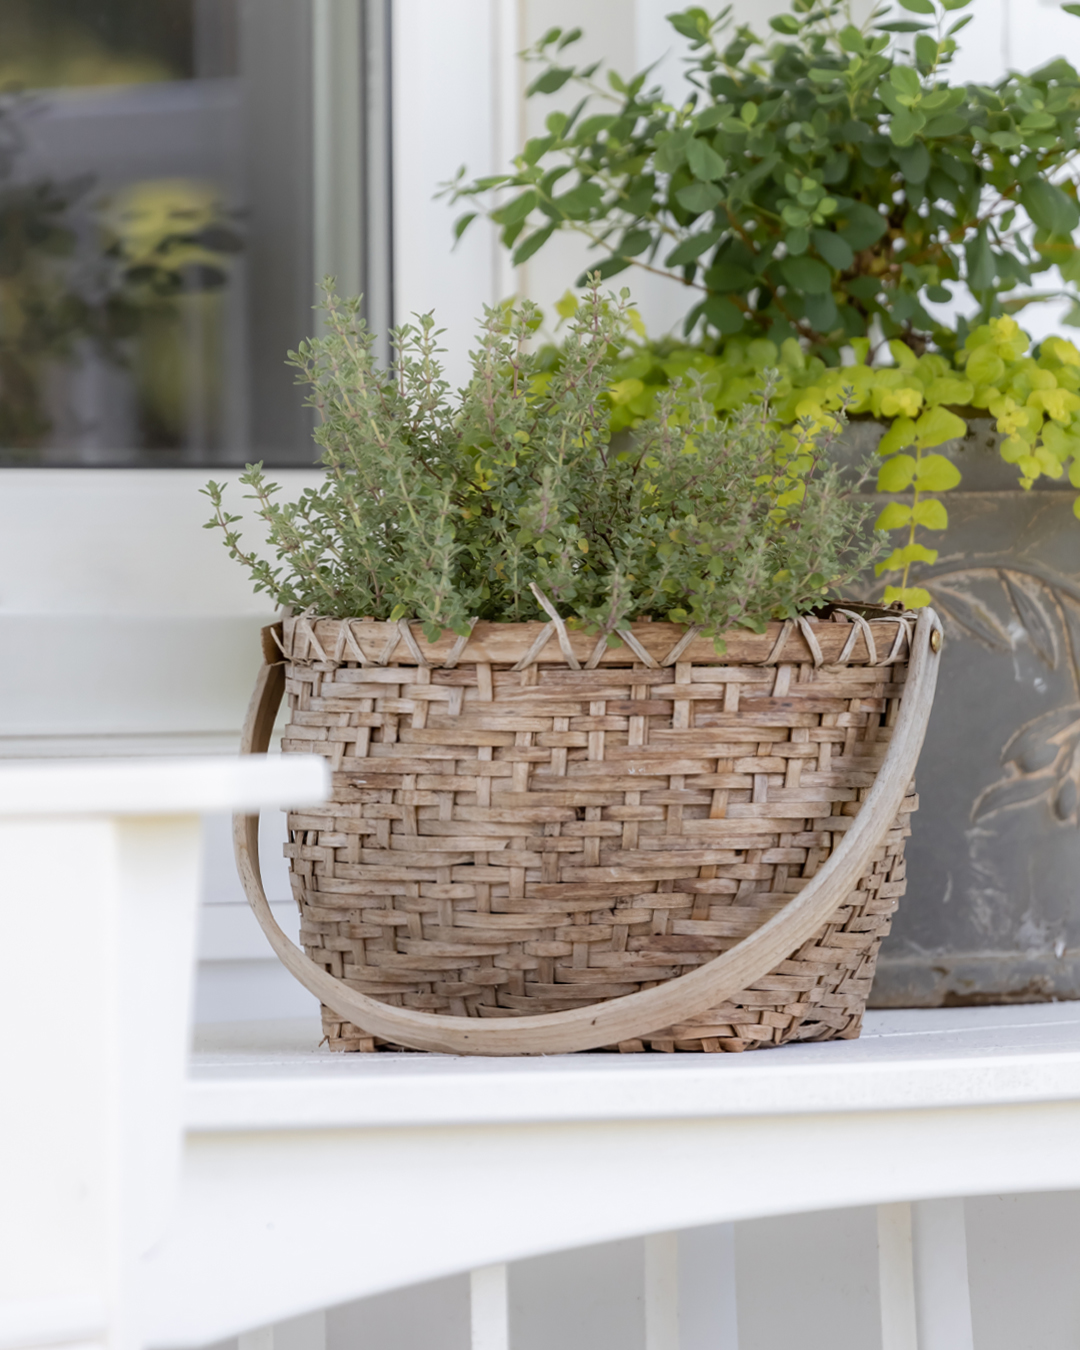 A basket used as a planter for thyme.